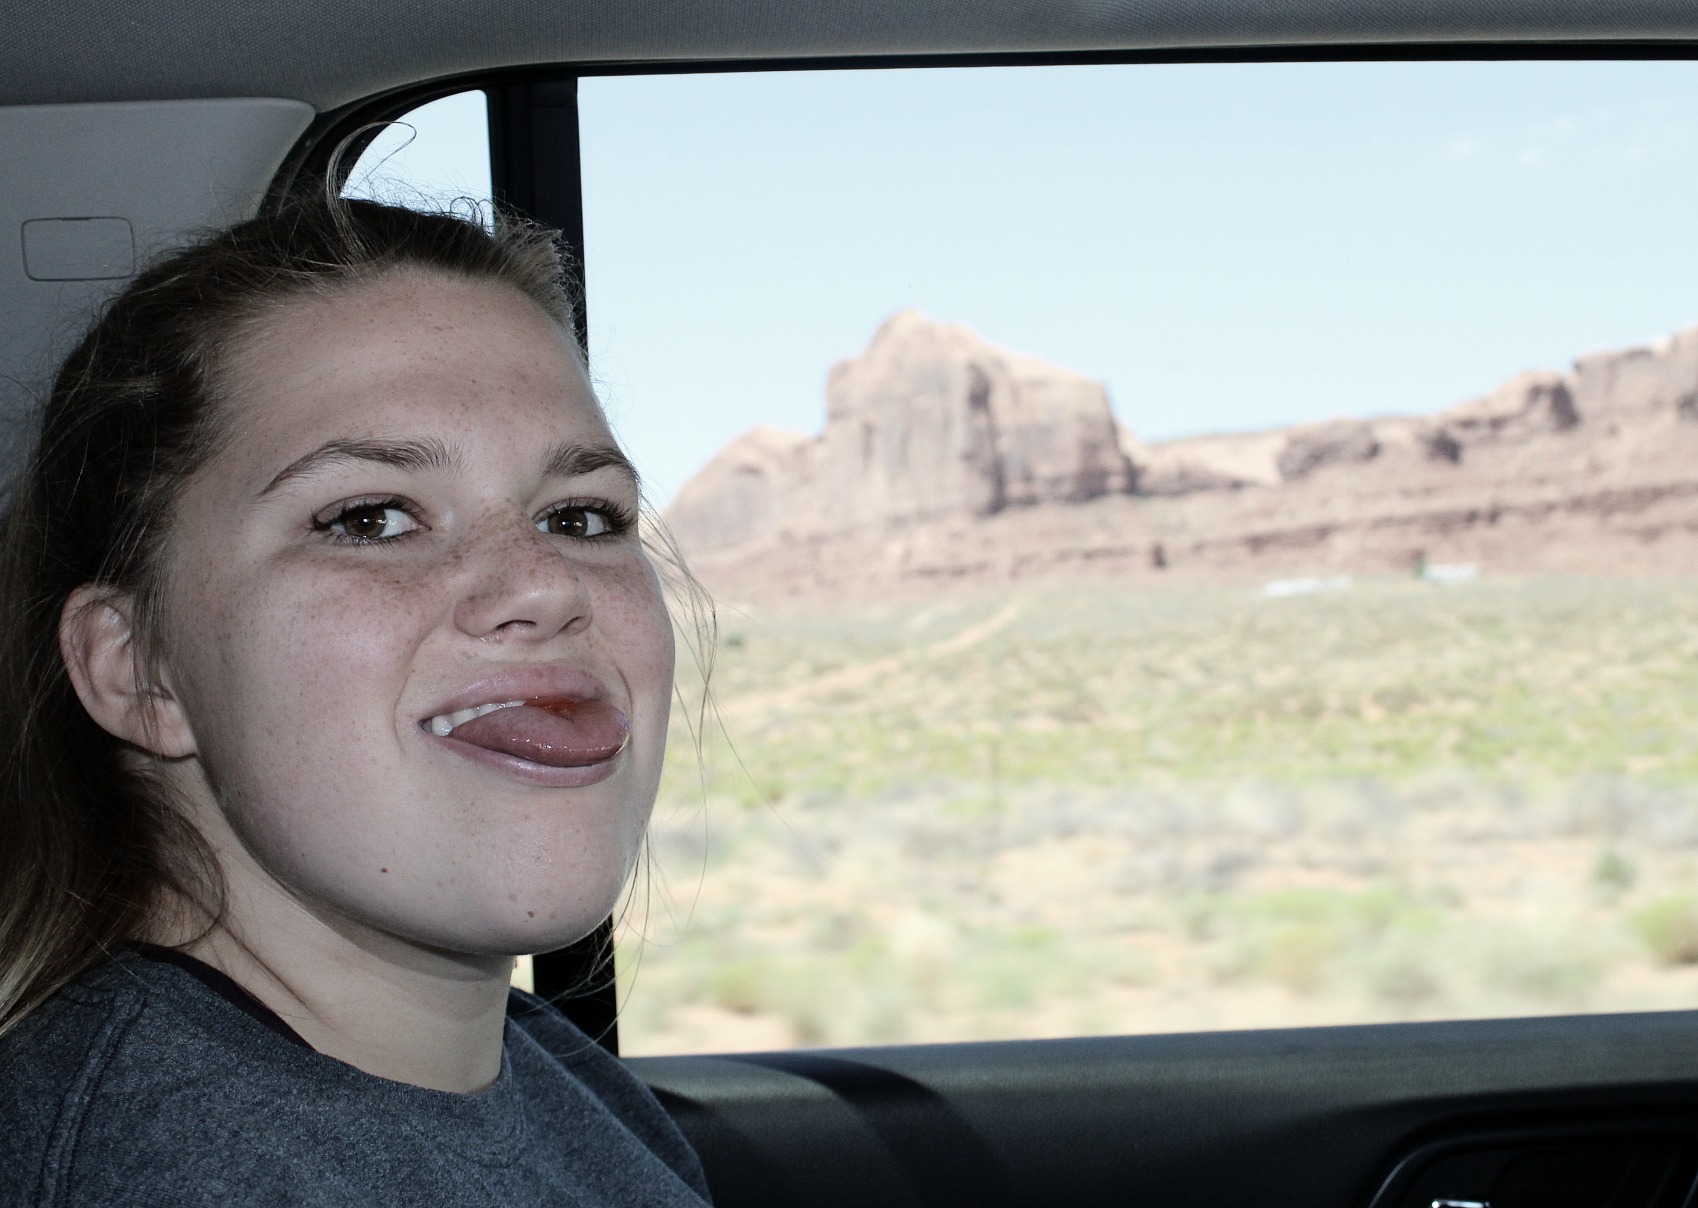 daughter sticking her tongue out while traveling